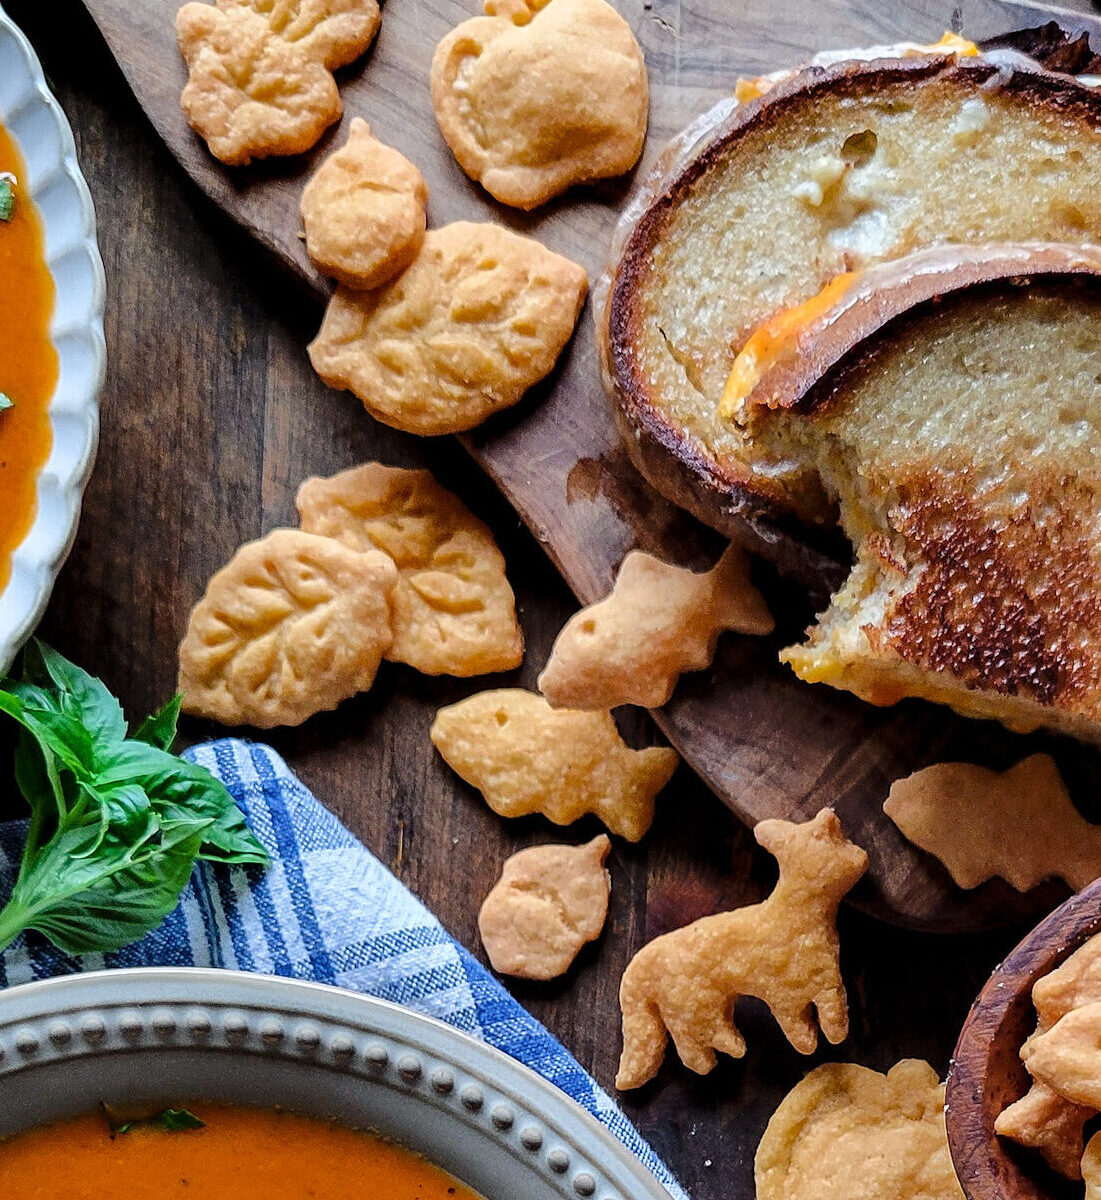 Gluten free goldfish, as well as other cheddar shapes are sitting with a grilled cheese sandwich and a bowl of tomato soup.